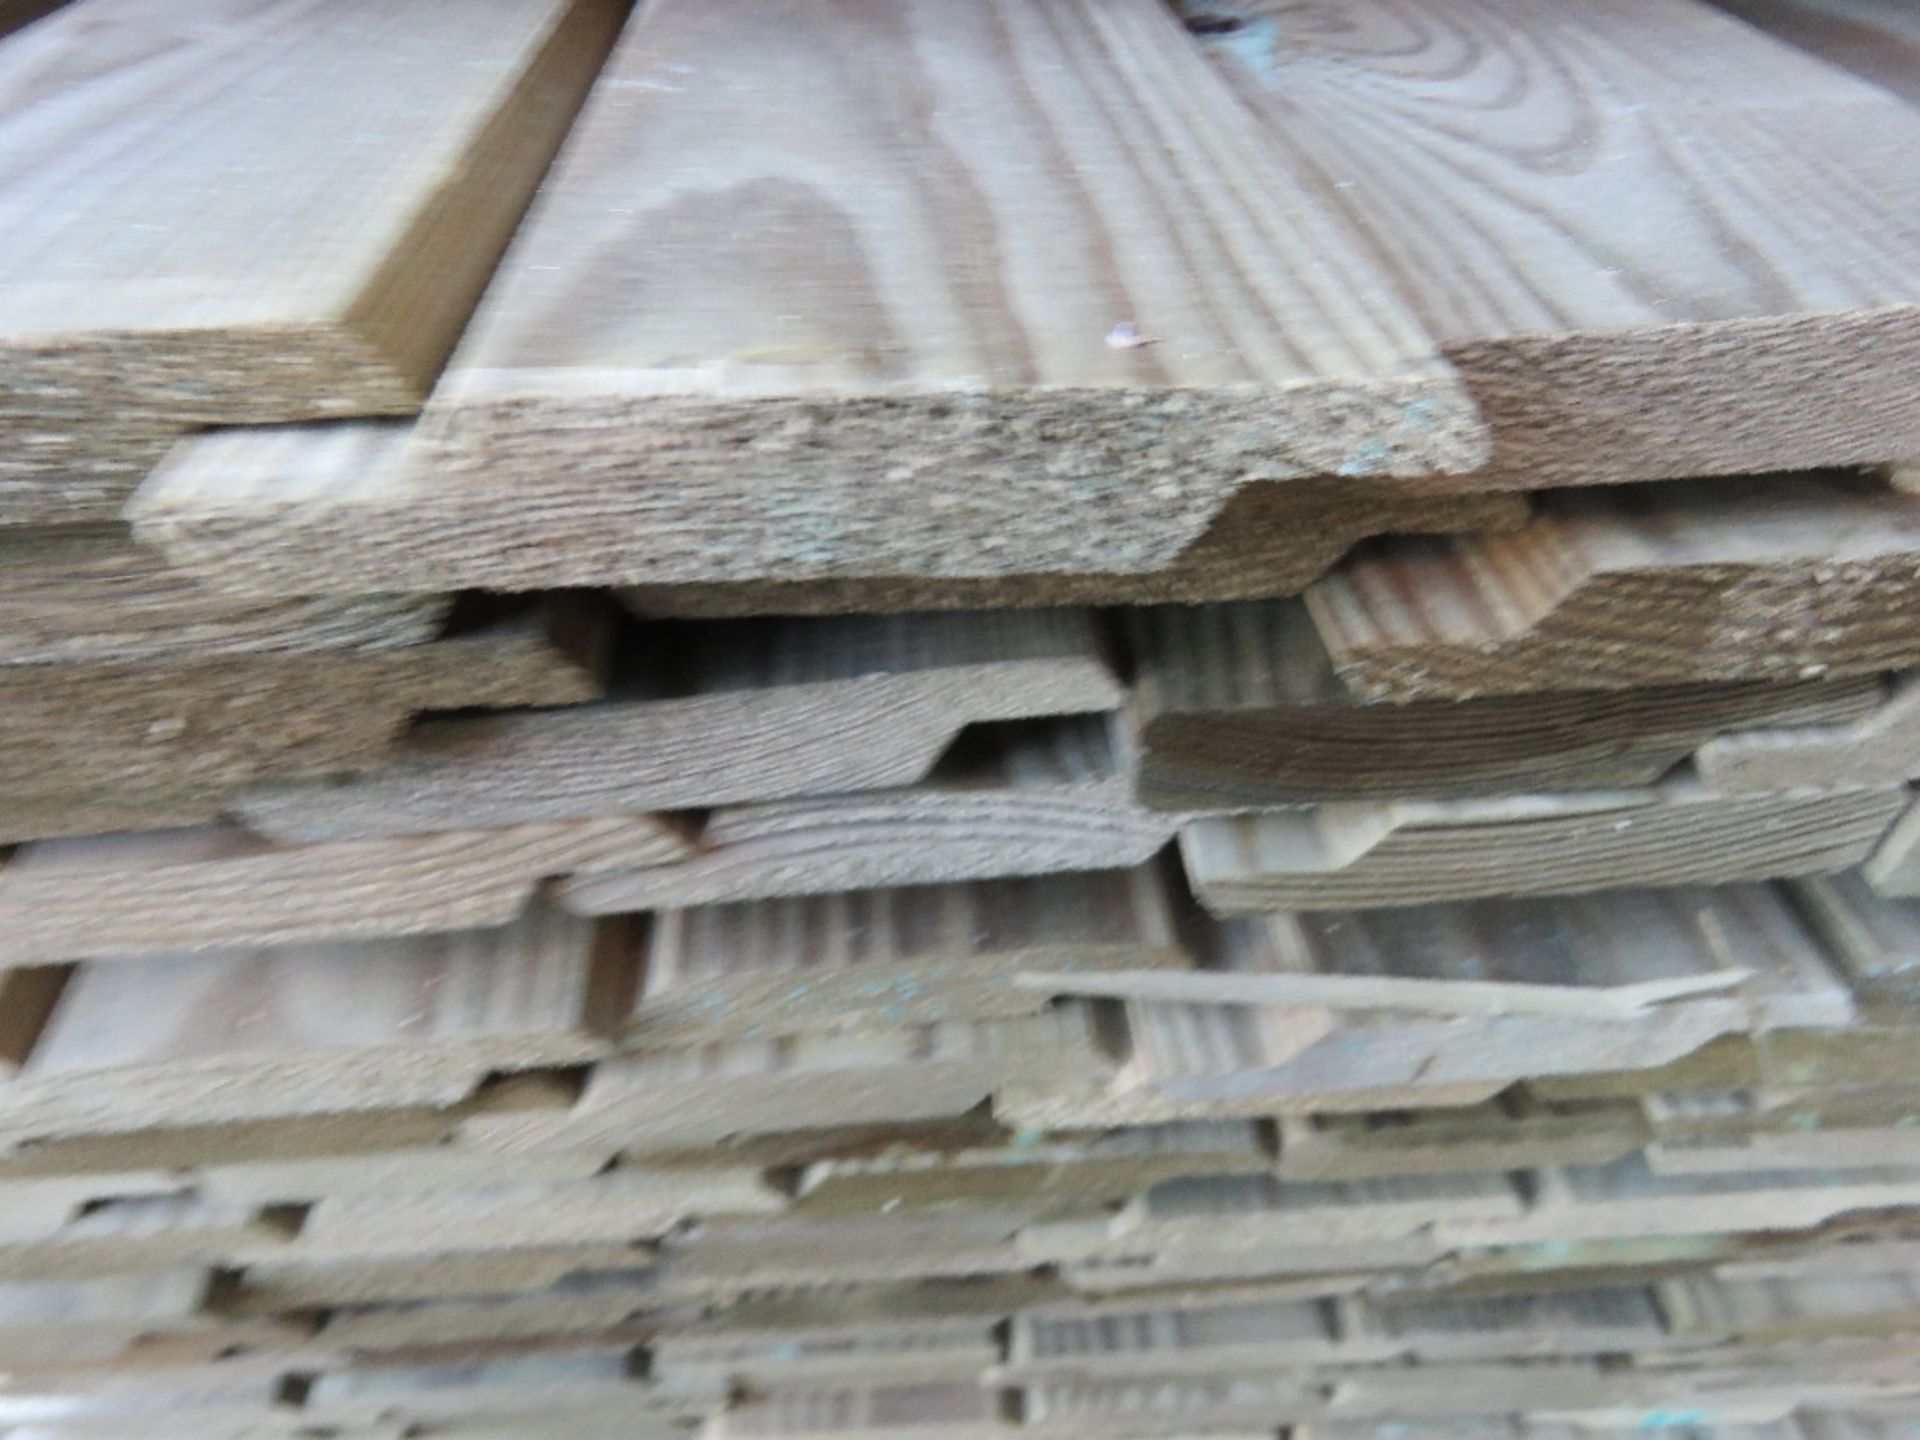 LARGE PACK OF TREATED SHIPLAP FENCE CLADDING TIMBER BOARDS. SIZE: 1.83M LENGTH X 10CM WIDTH APPROX. - Image 3 of 3